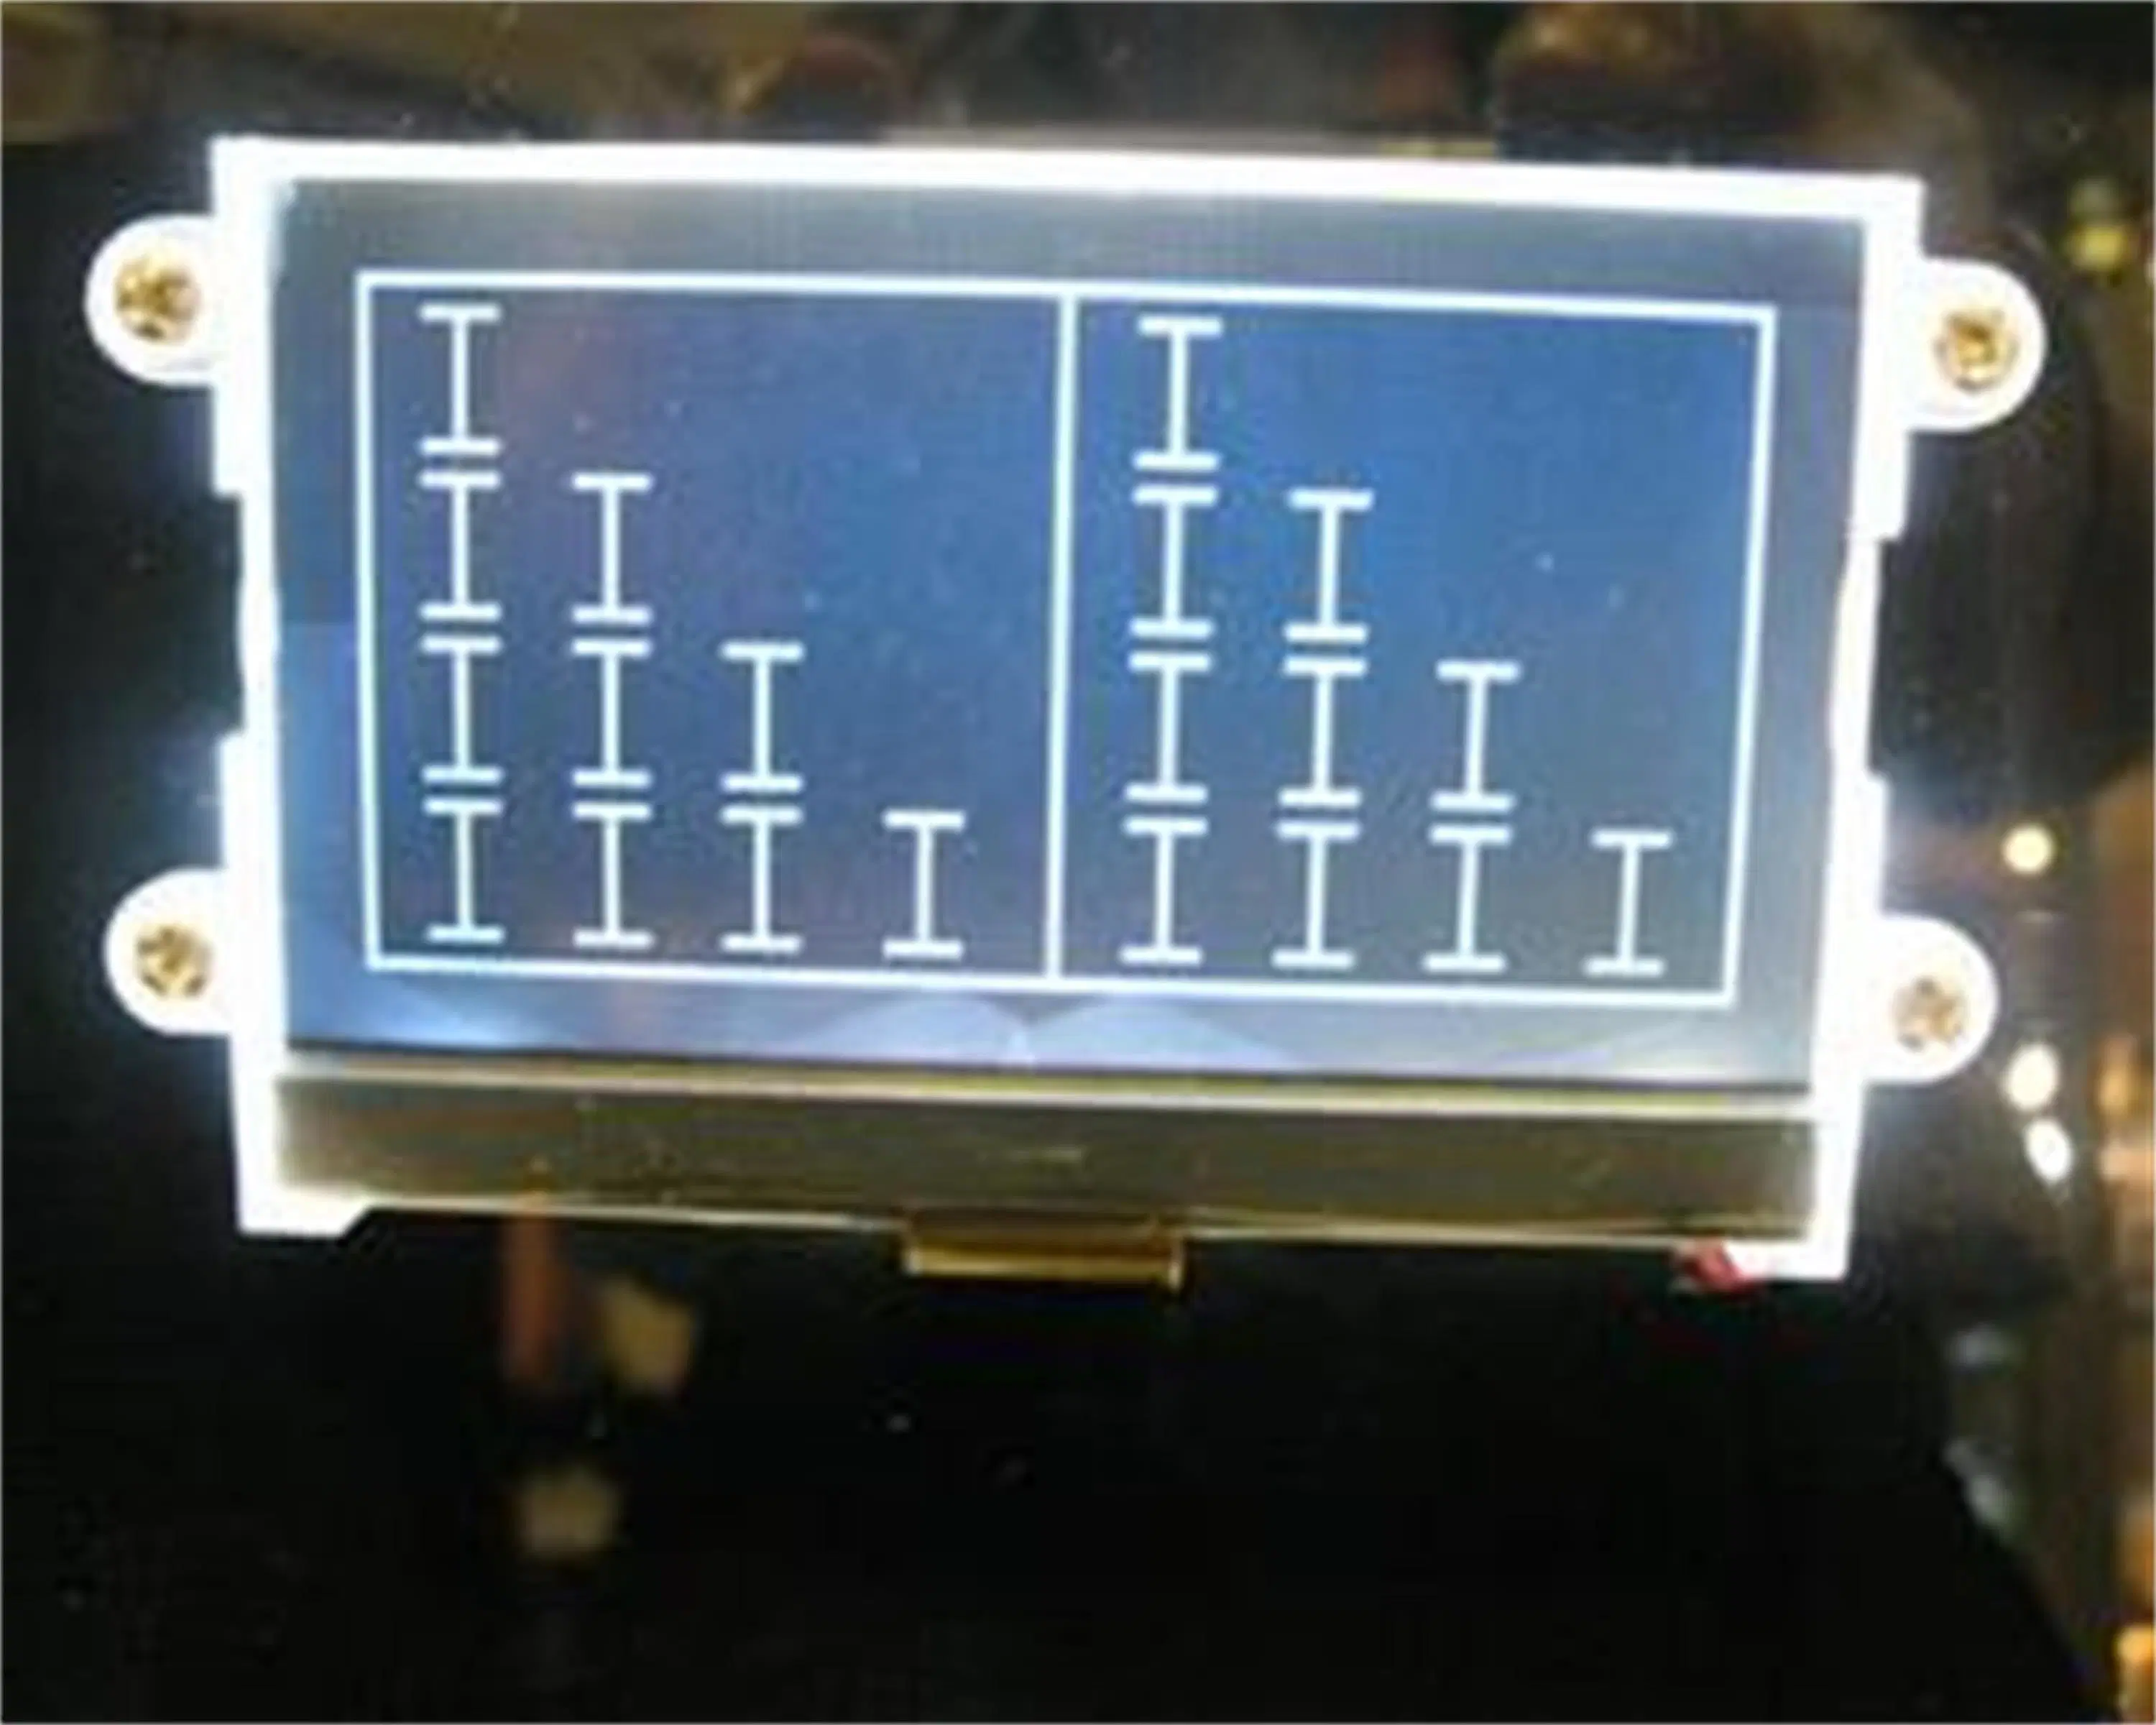 Mono Graphic digital LCD Display with ST7920 Controller